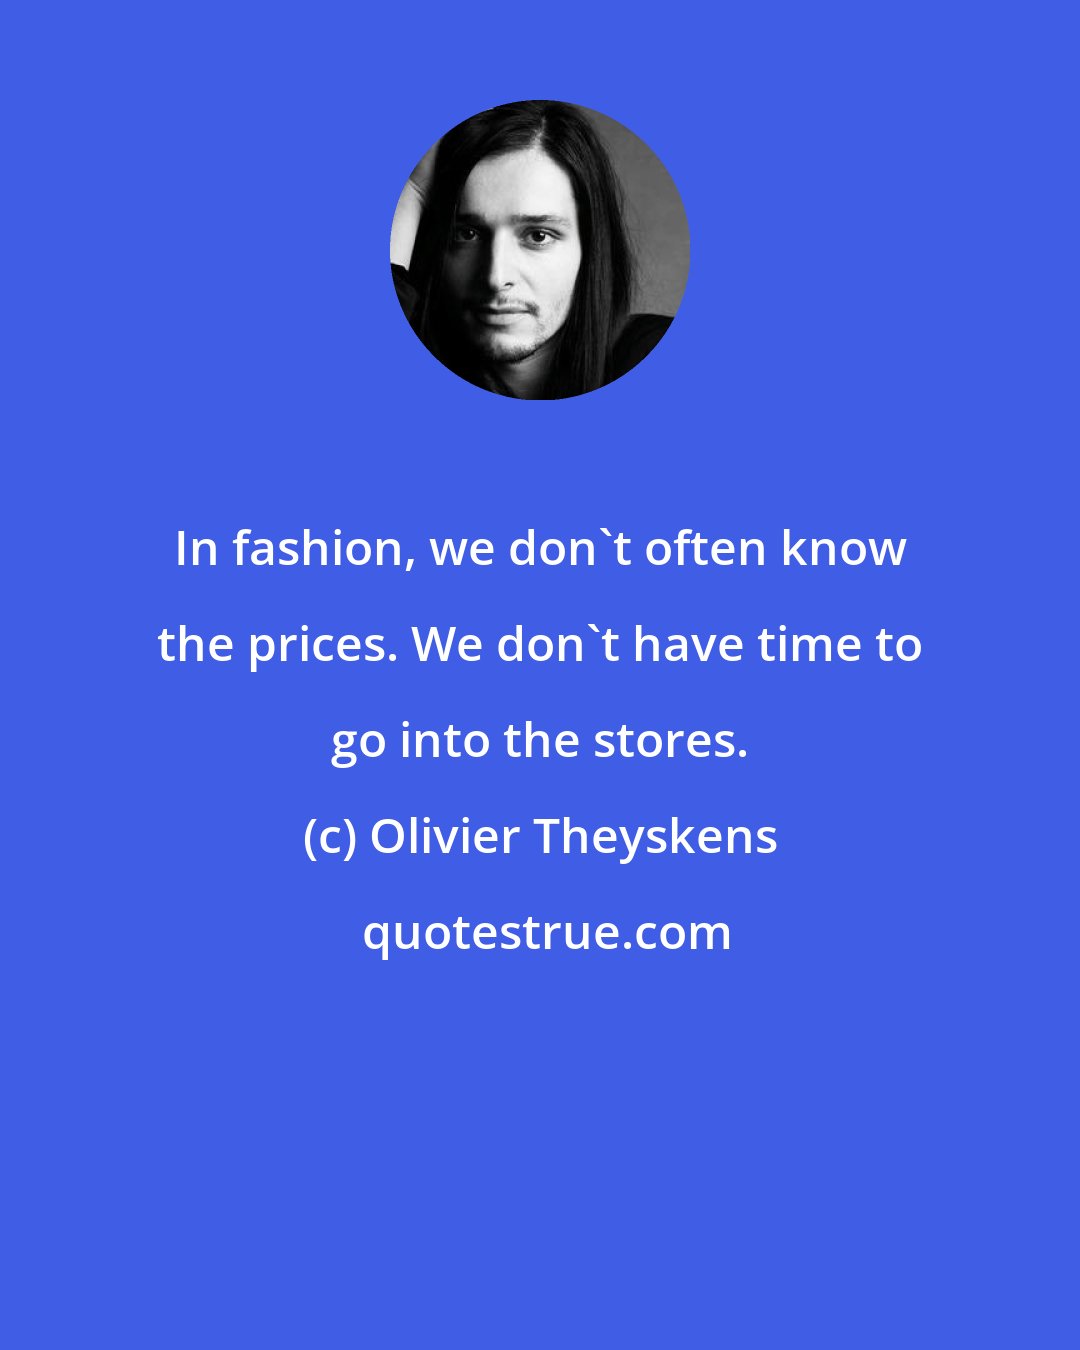 Olivier Theyskens: In fashion, we don't often know the prices. We don't have time to go into the stores.